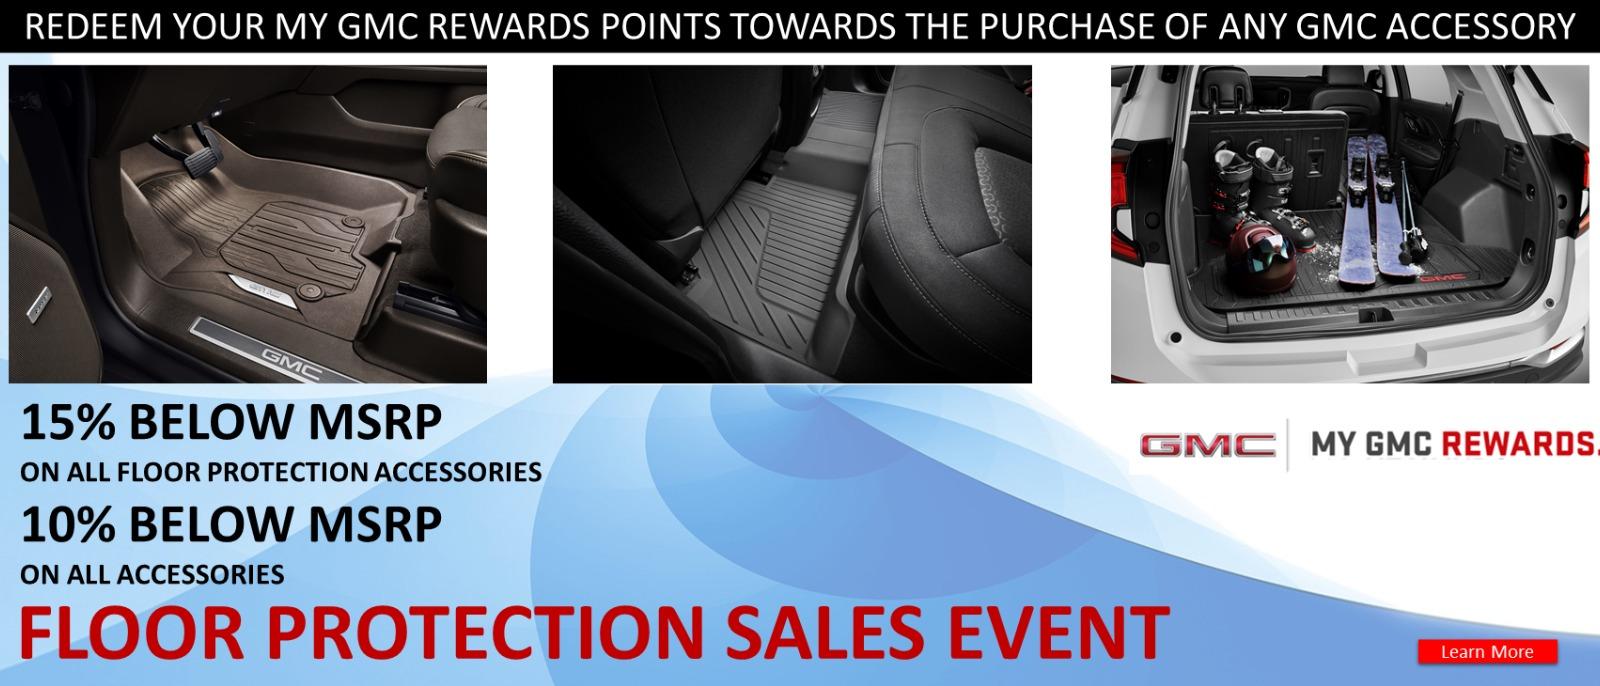 Redeem your my GMC rewards points towards the purchase of any GMC accessory Floor Protection sales event 15% below MSRP on all floor protection accessories 10% below MSRP on all accessories